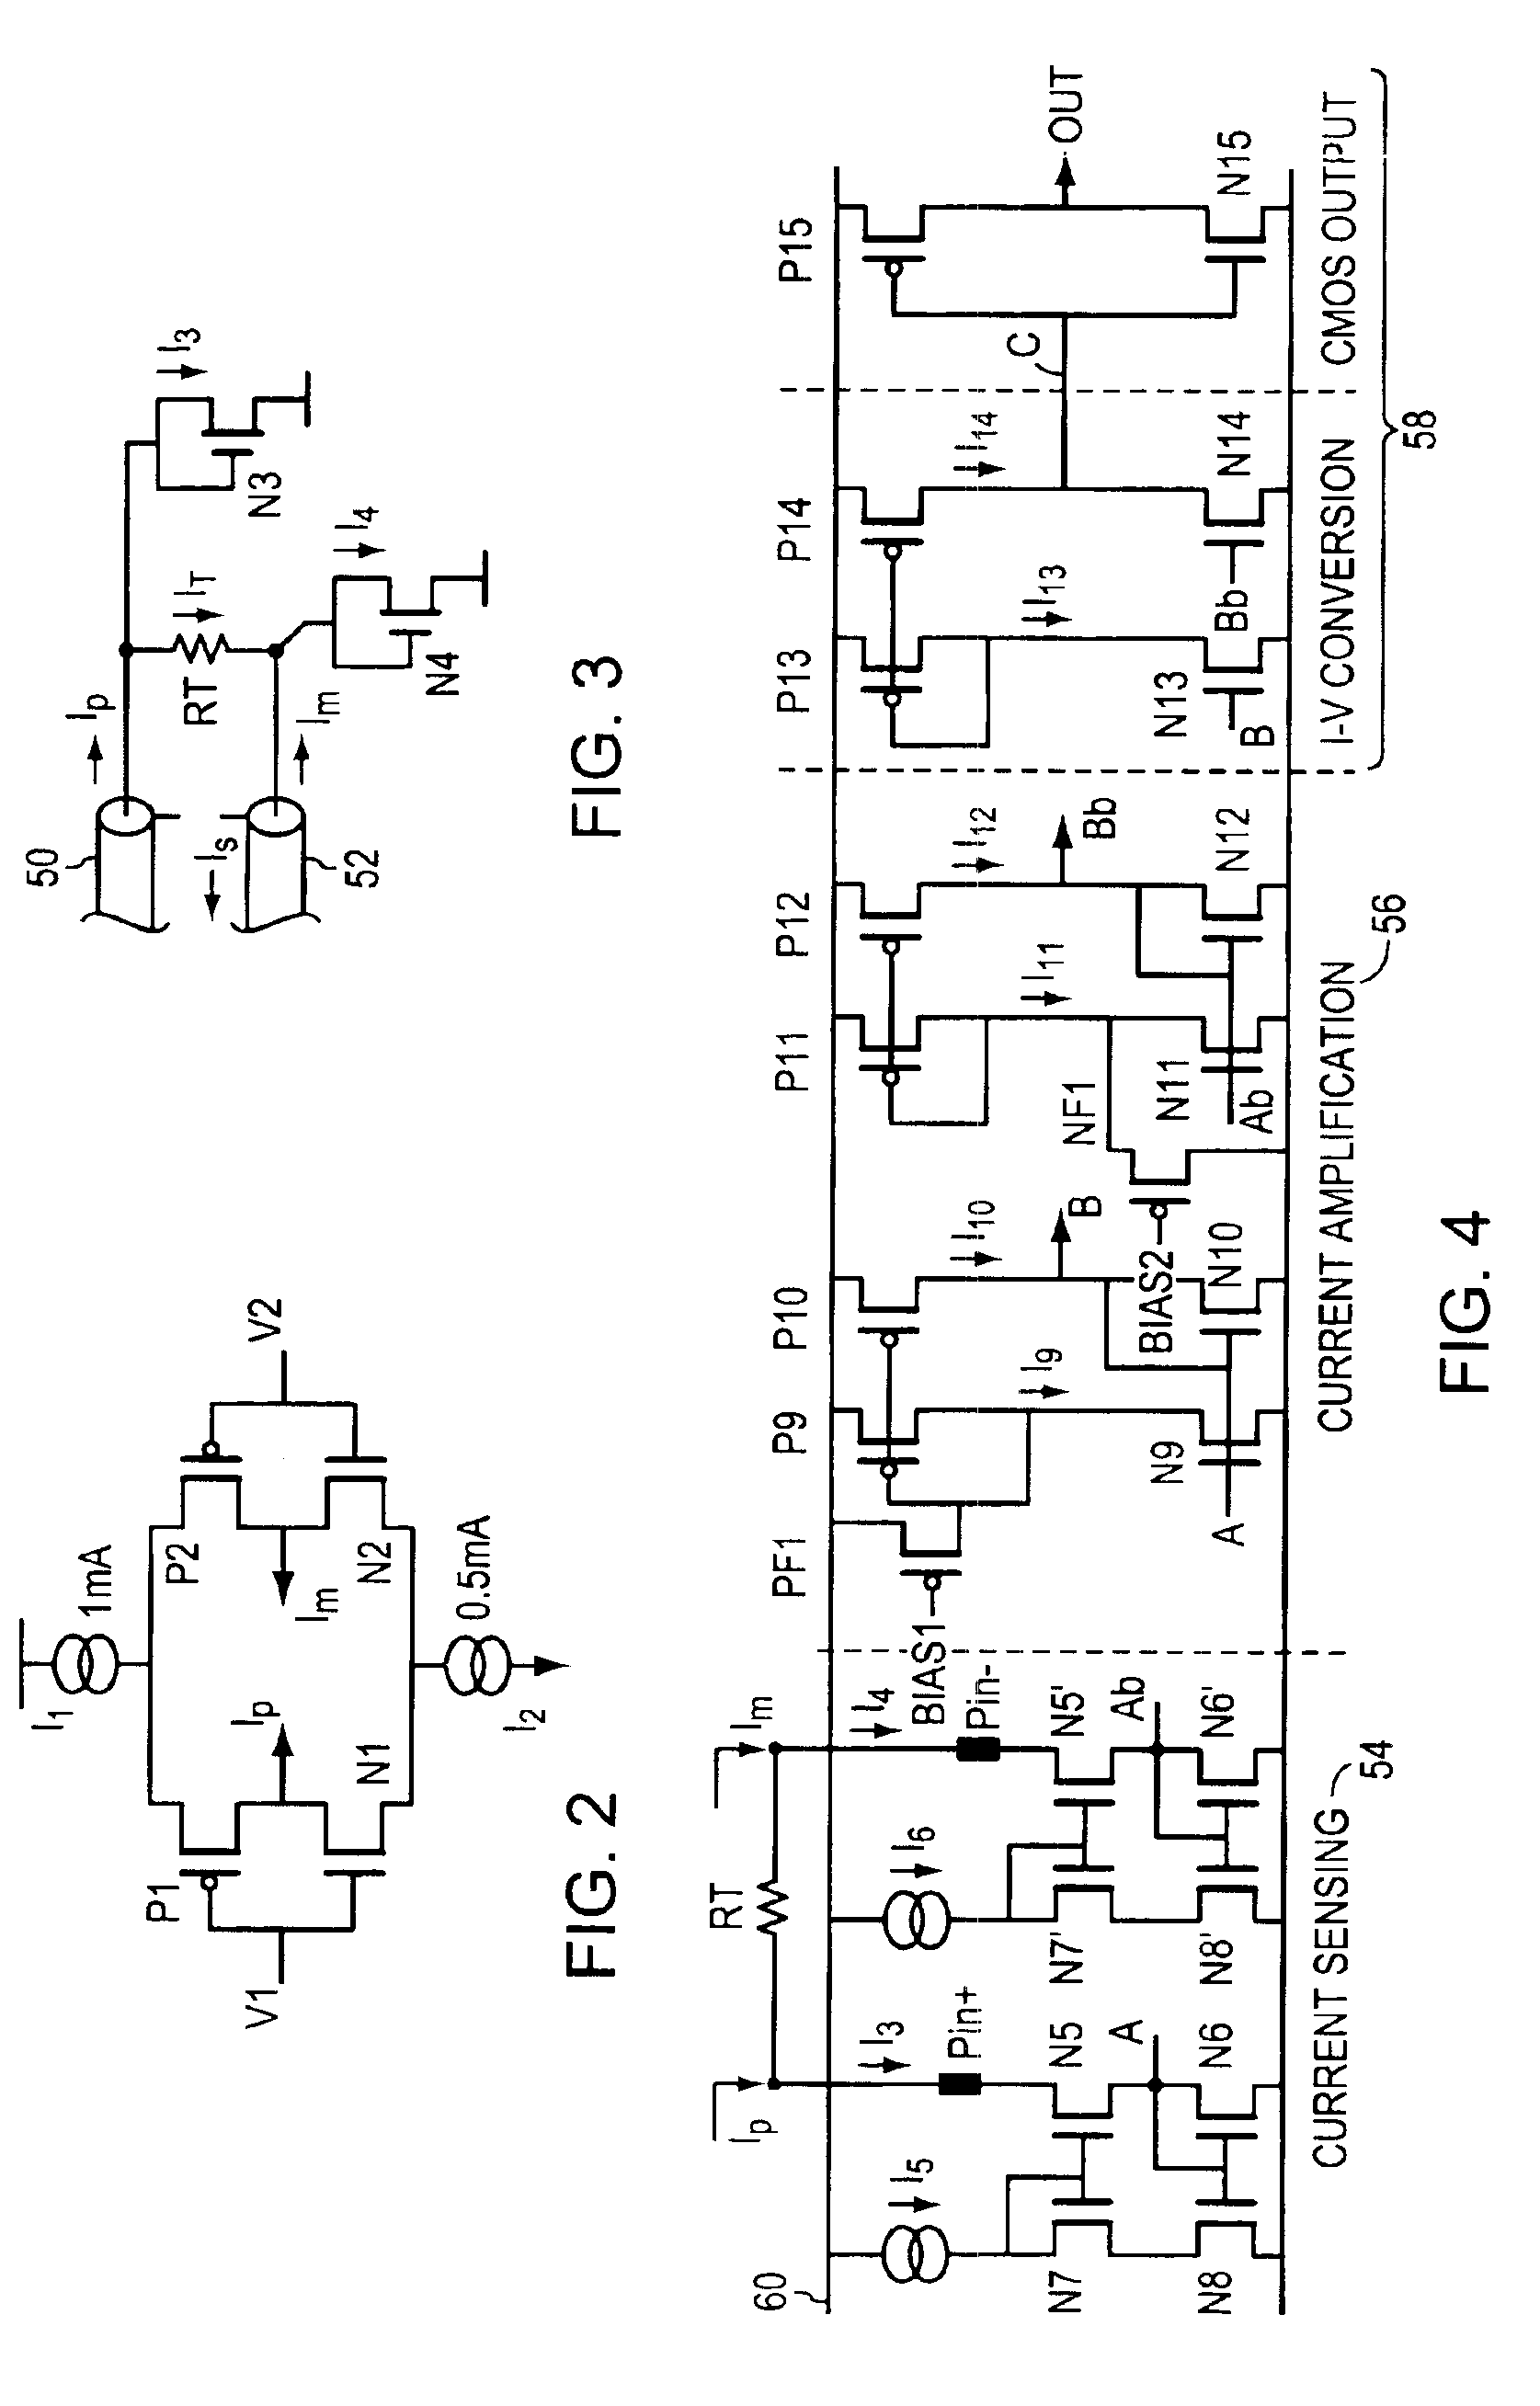 Failsafe for differential circuit based on current sense scheme